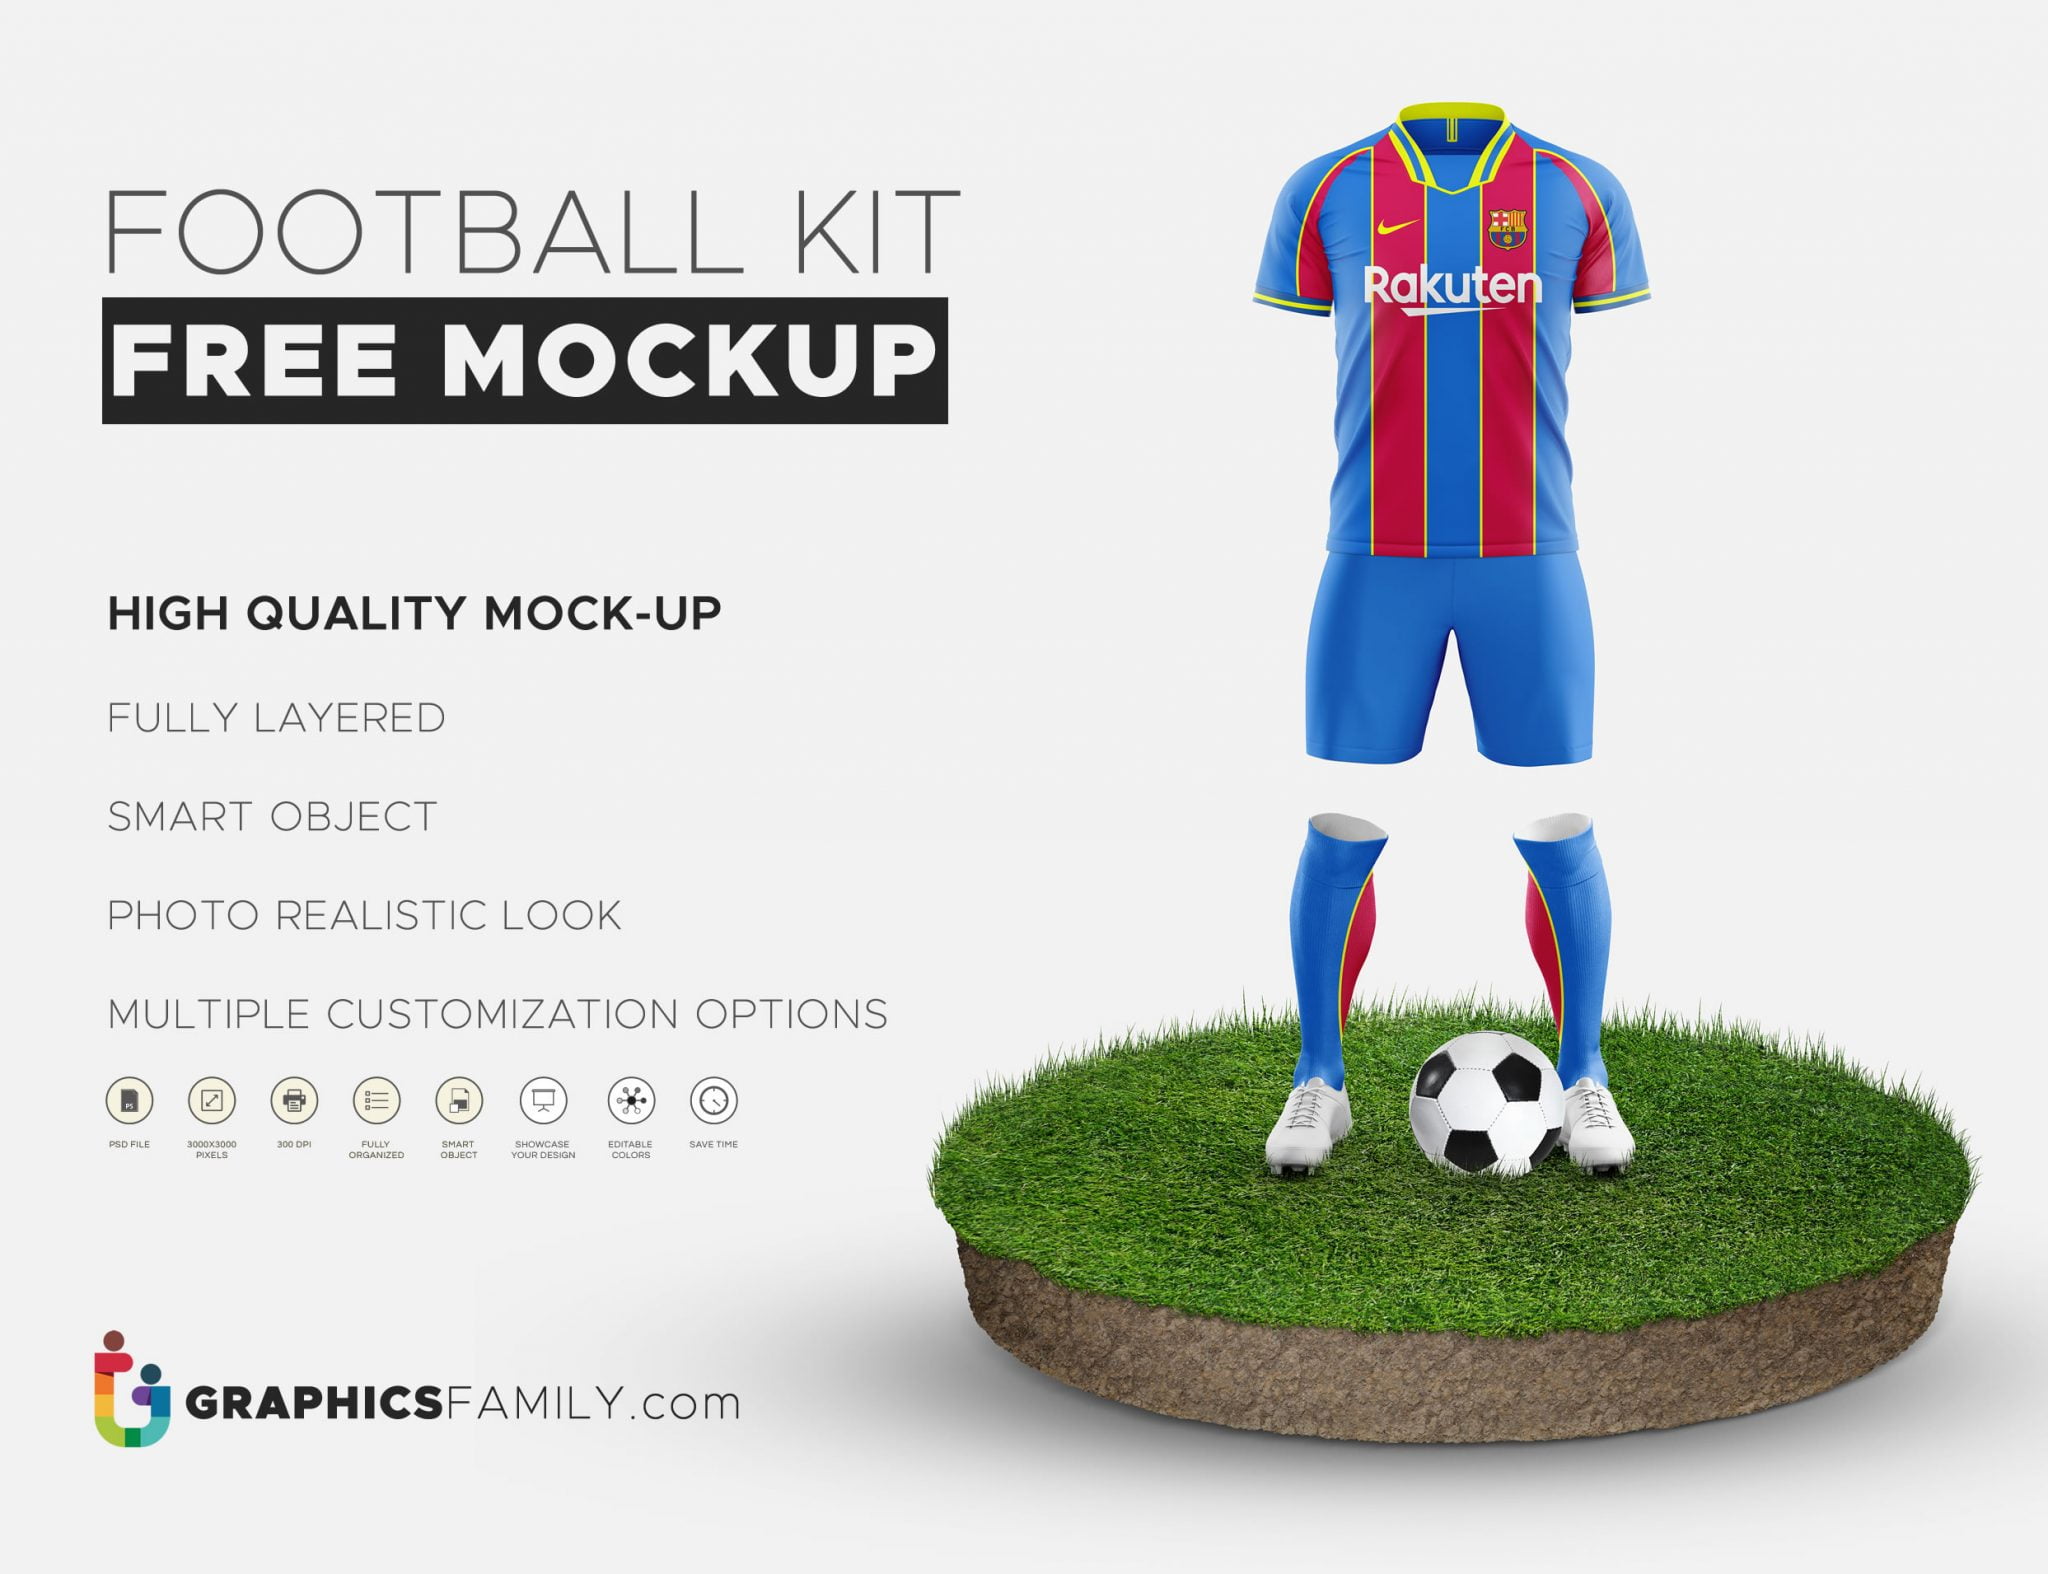 Download Free Football Kit Mockup Template - GraphicsFamily